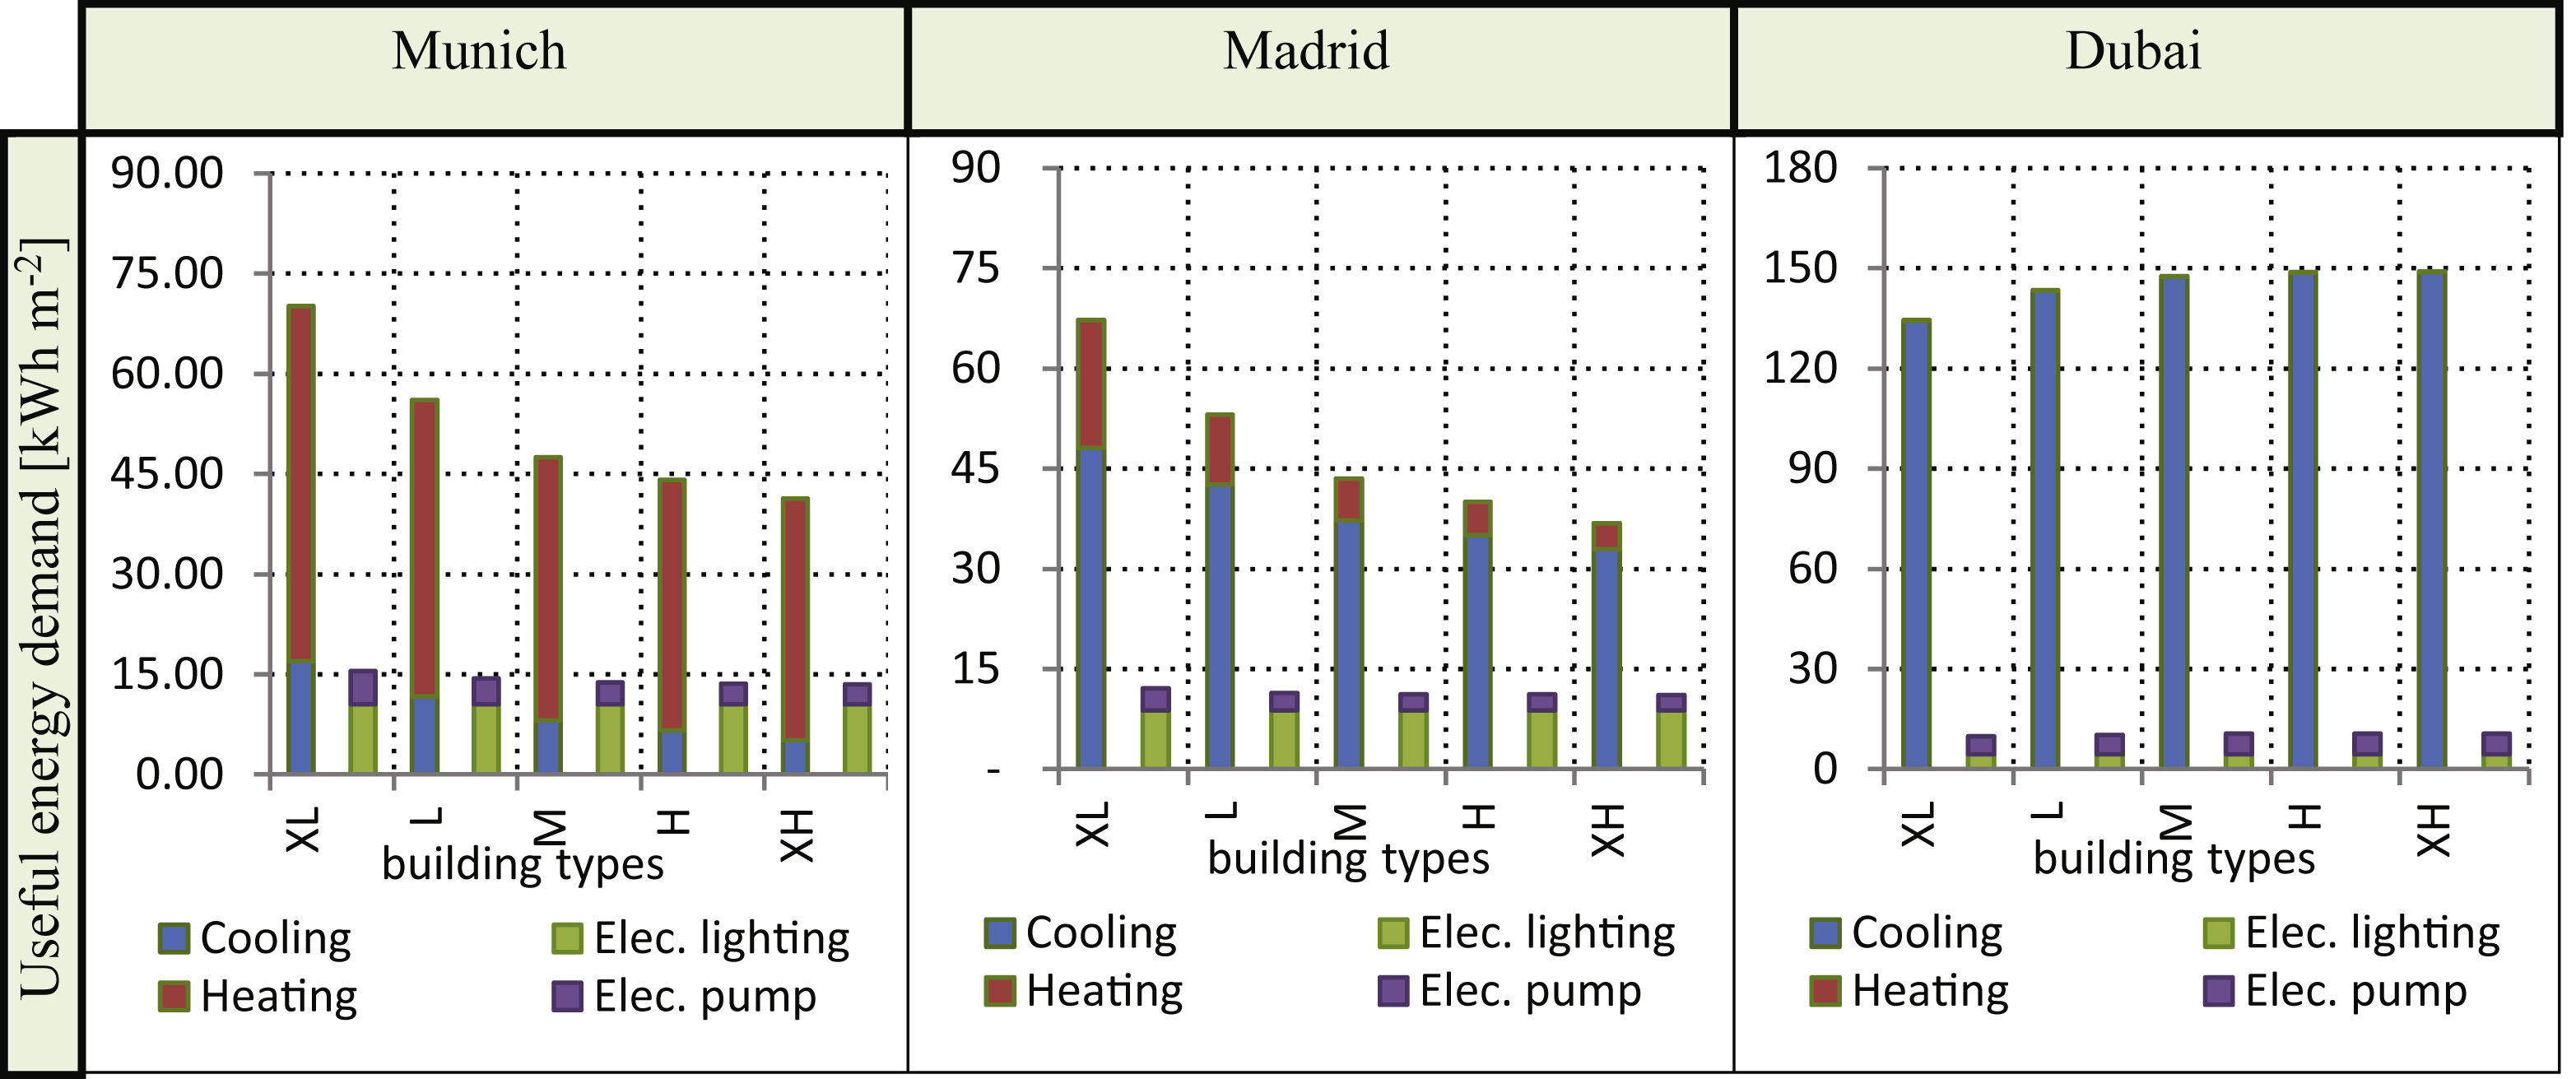 Resulting annual useful energy demand [kWh/m2] for heating, cooling, electrical energy demand for lighting and auxiliary pumps of the reference building with solar glazing (Tsol = 0.177) in Munich, Madrid and Dubai for extremely light (XL), light (L), medium (M), heavy (H) and extremely heavy (XH) buildings.